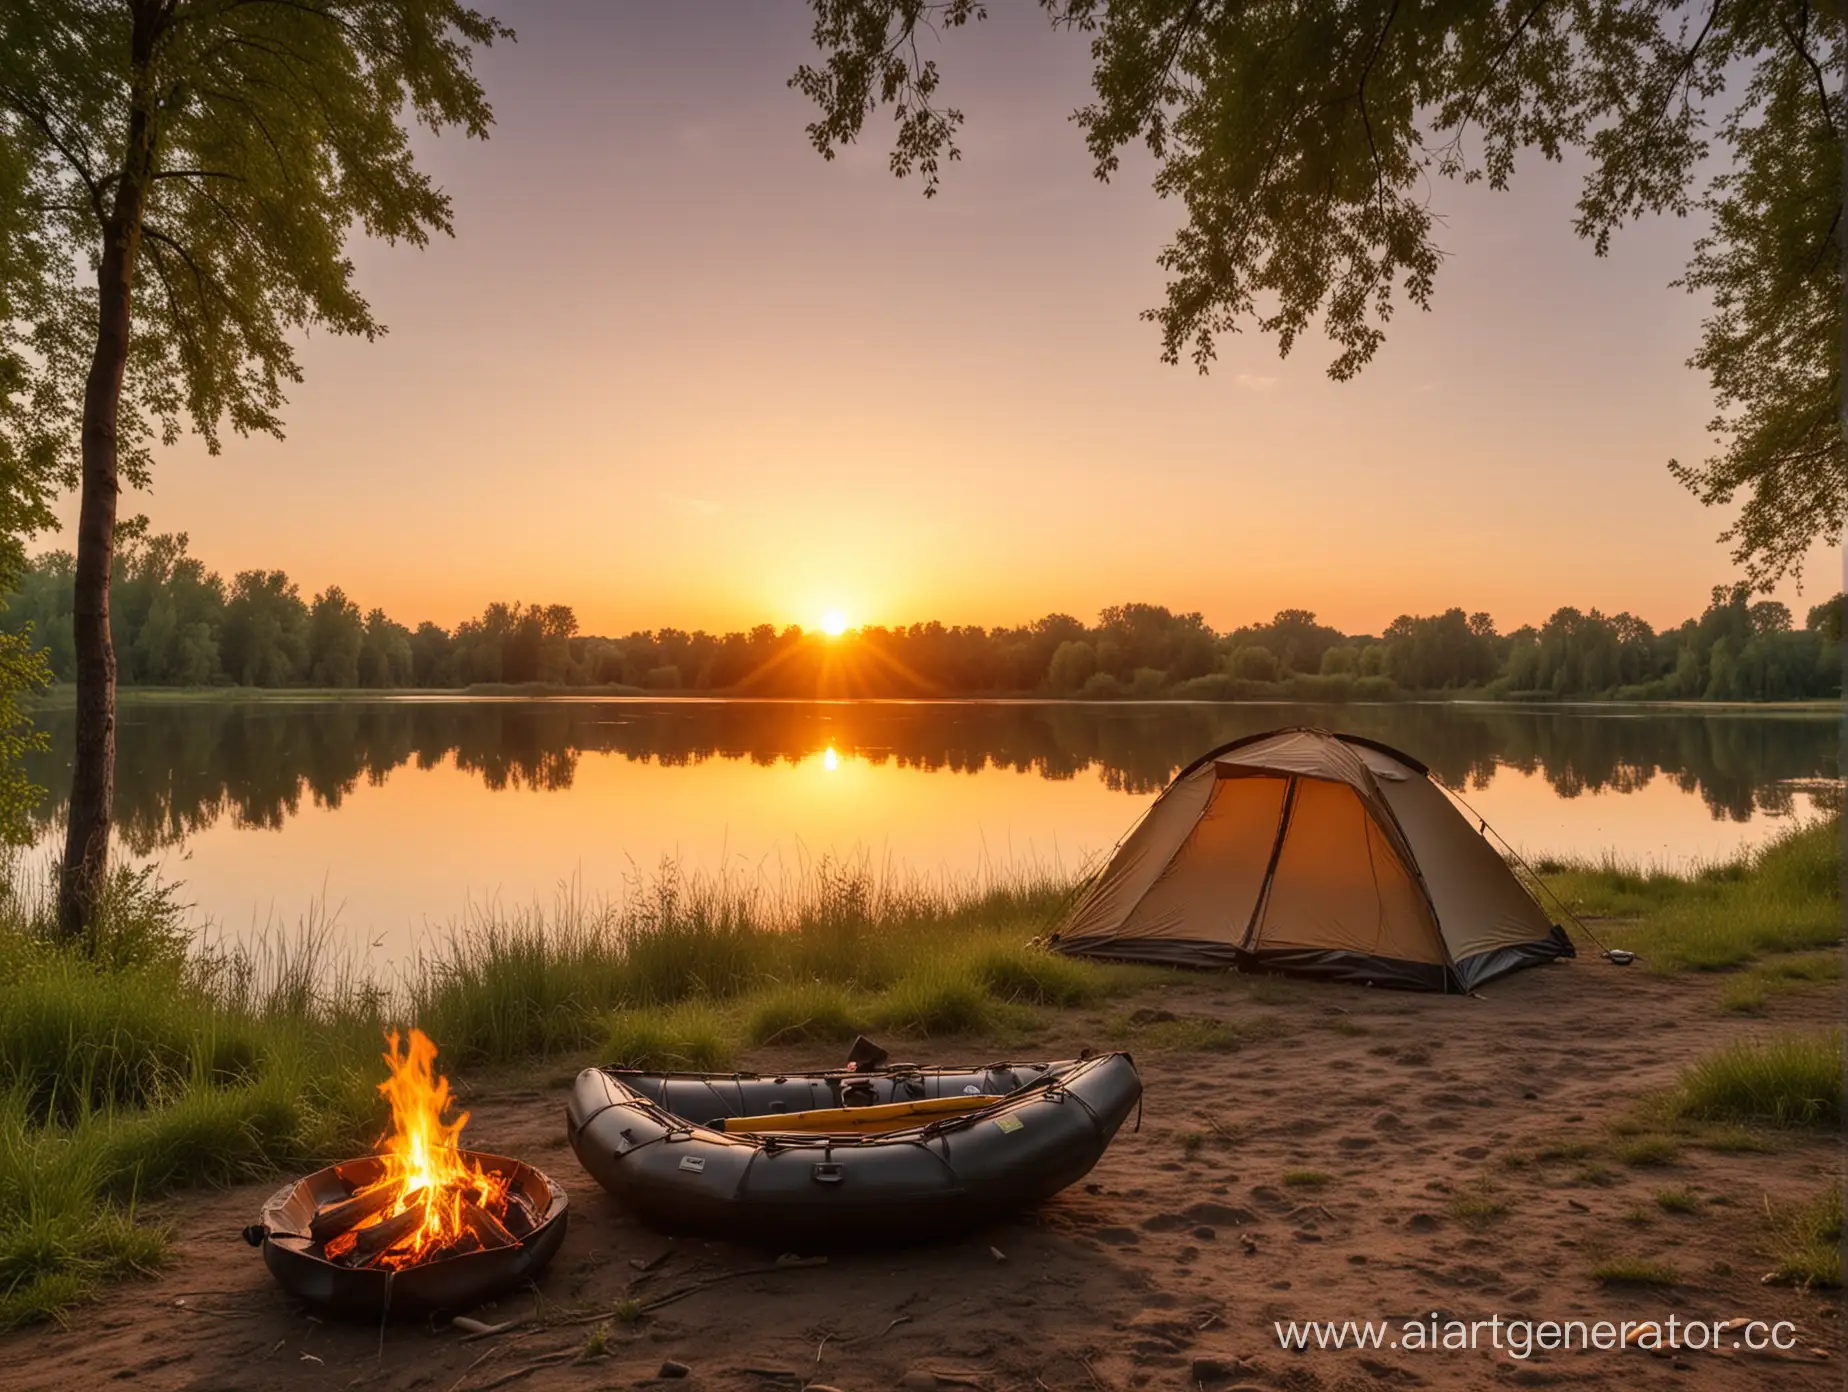 Sunset-Camping-by-the-River-with-Family-and-Inflatable-Boat